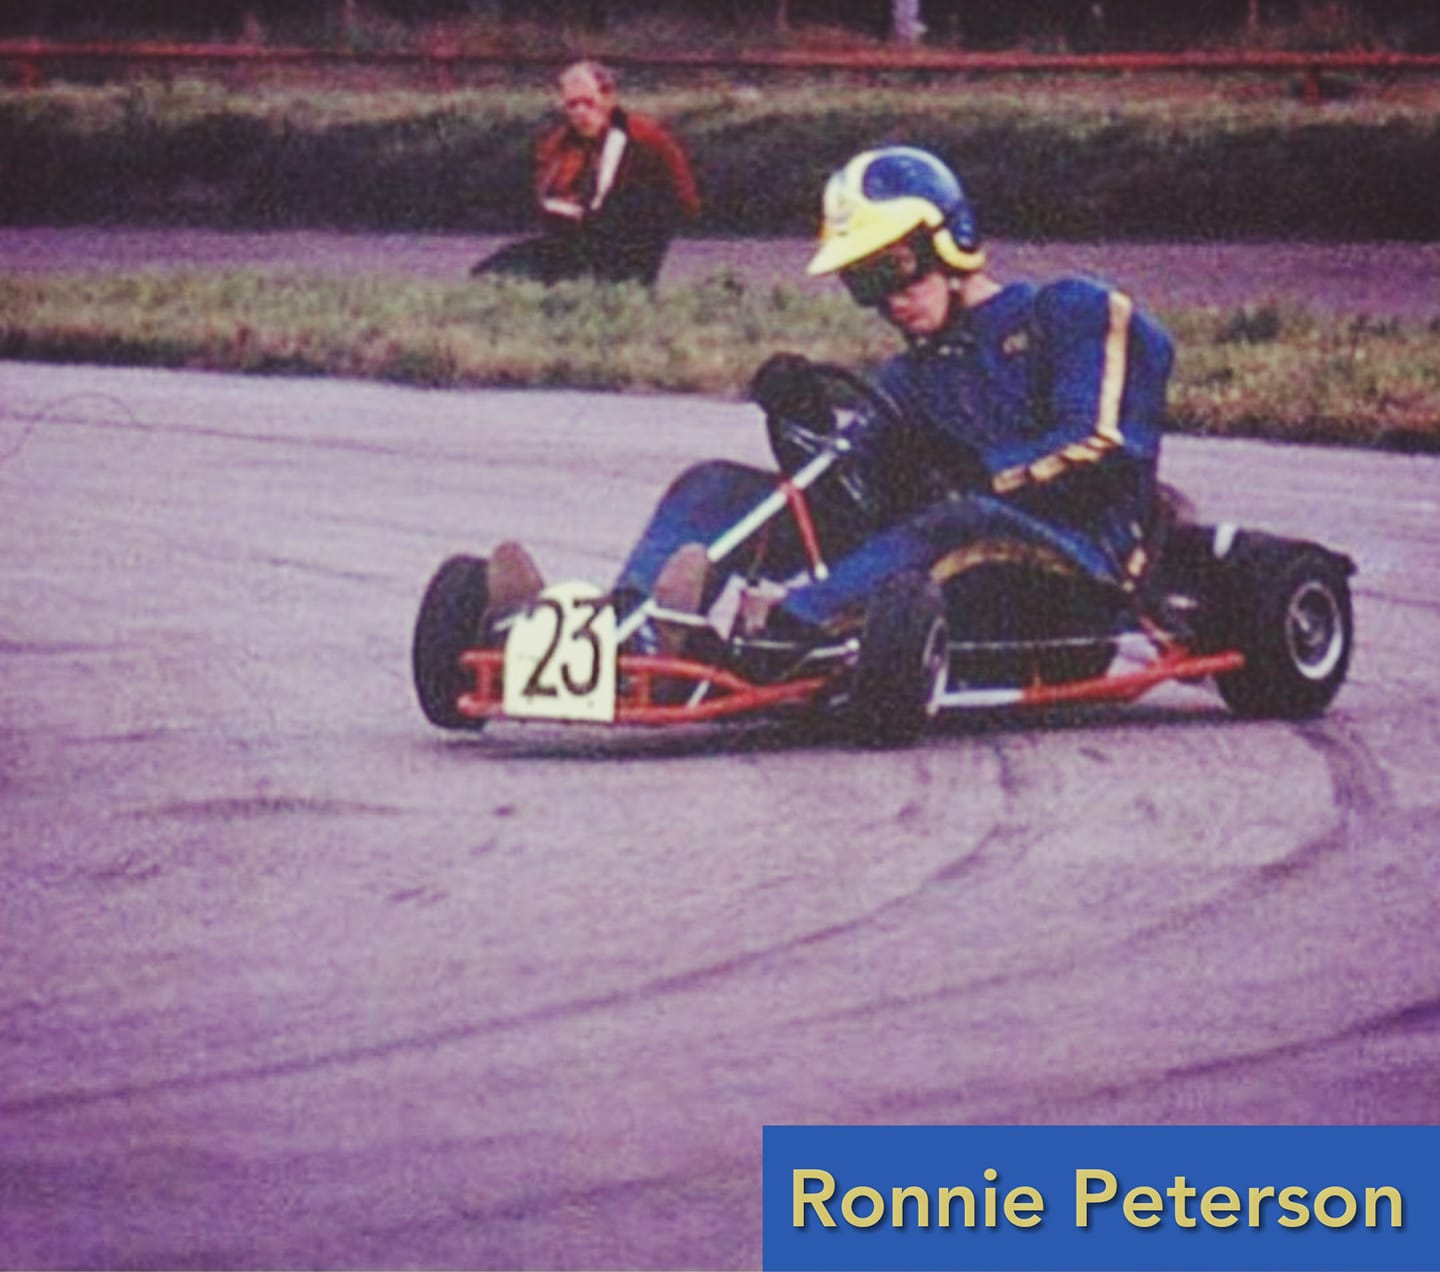 Ronnie Peterson driving his kart.